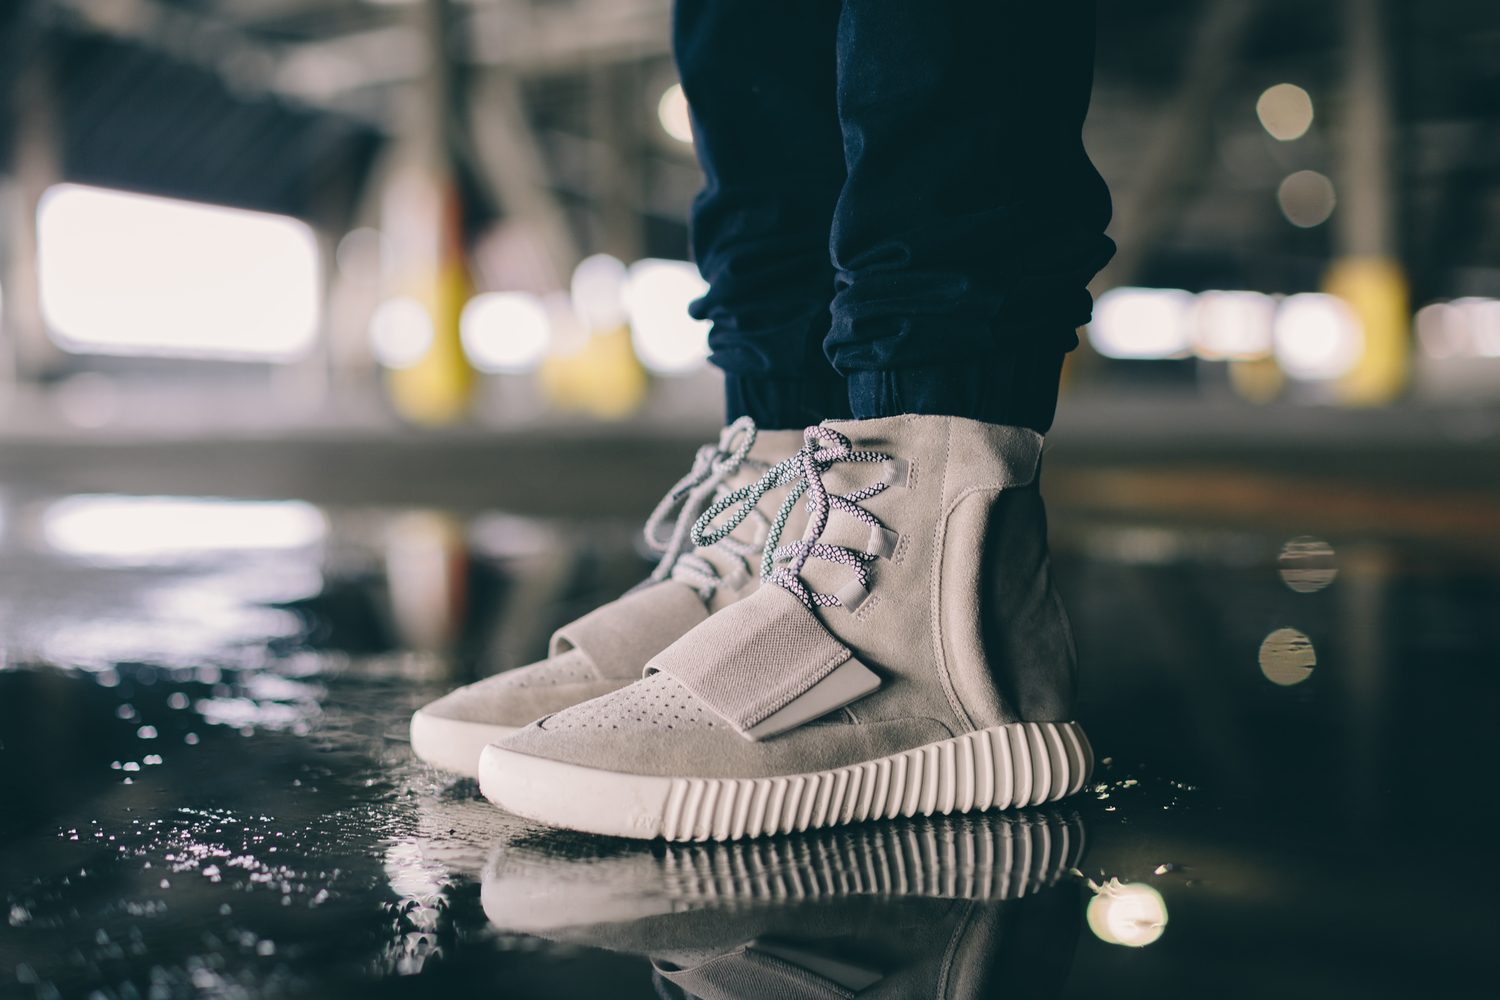 Foot Look at the Adidas Yeezy 750 Boost Sizing Info Sneaker